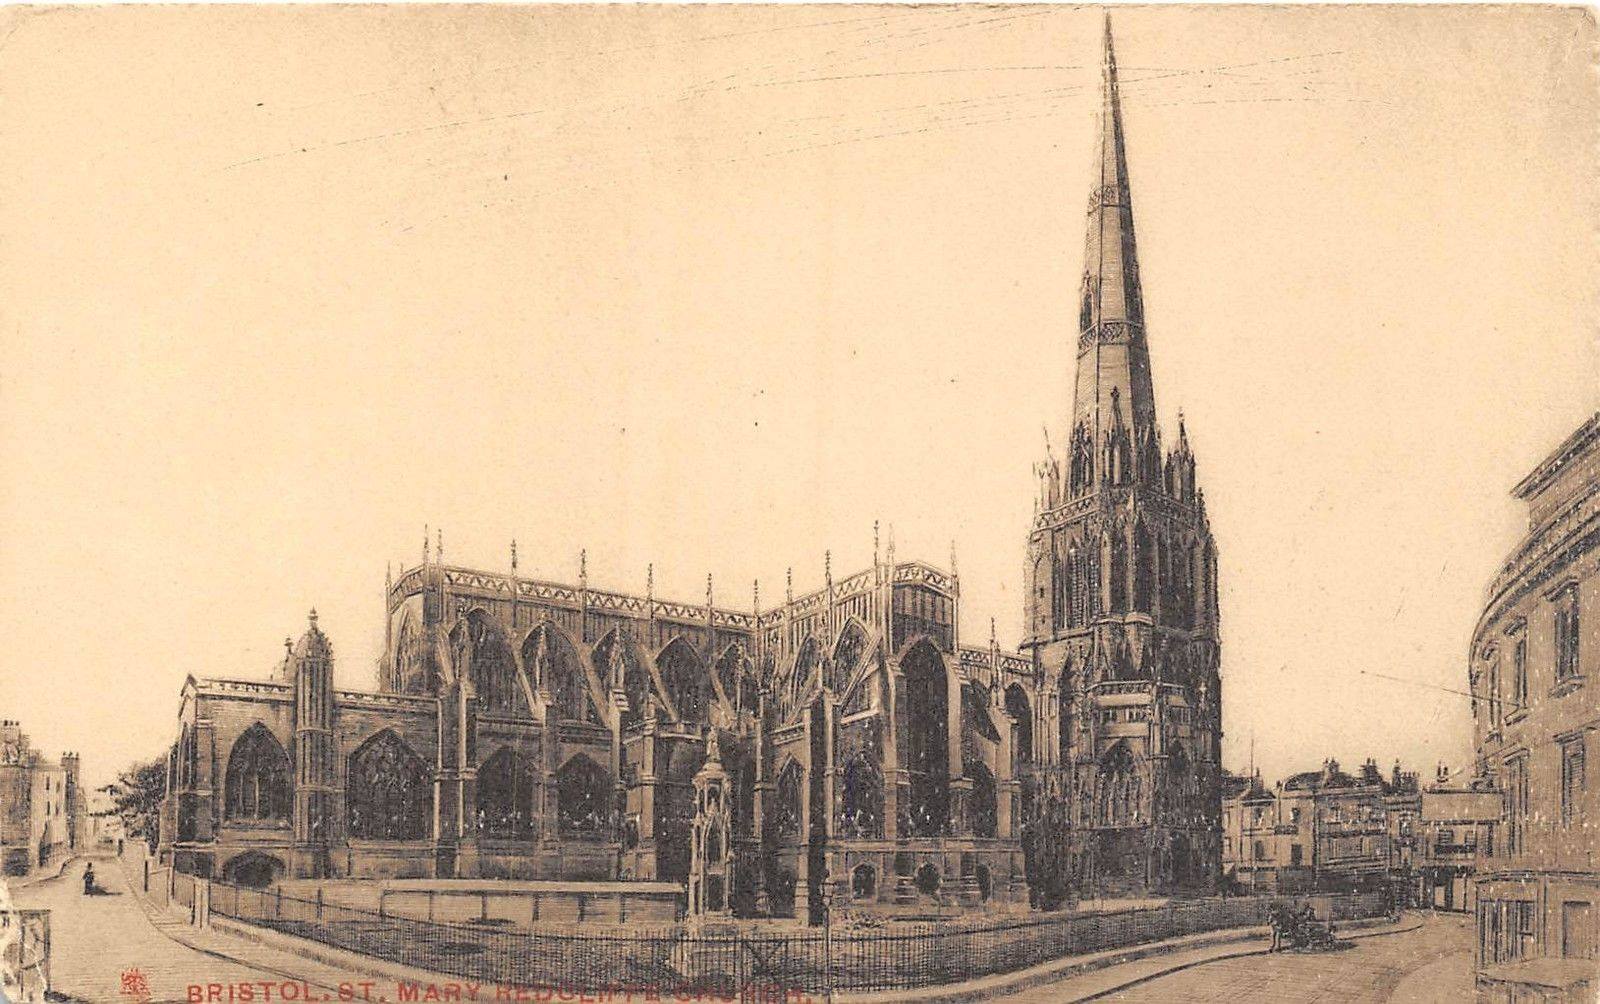 Old photo of St Mary Redcliffe Church in Bristol